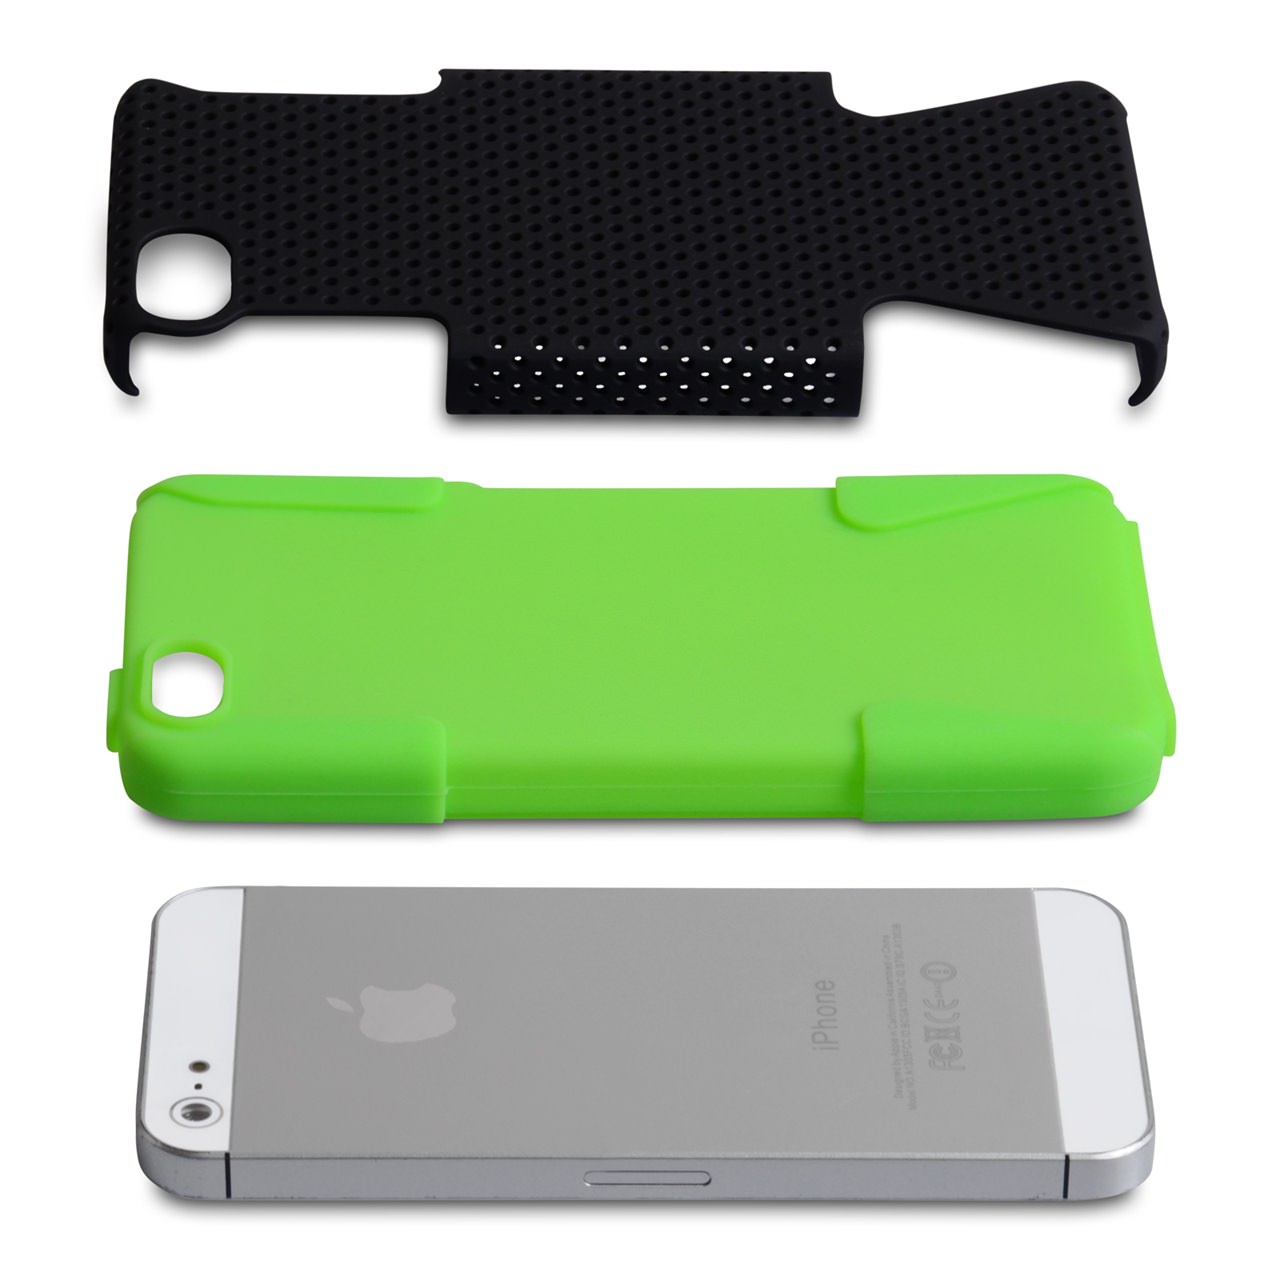 YouSave Accessories iPhone 5 / 5S Green Mesh Combo Case